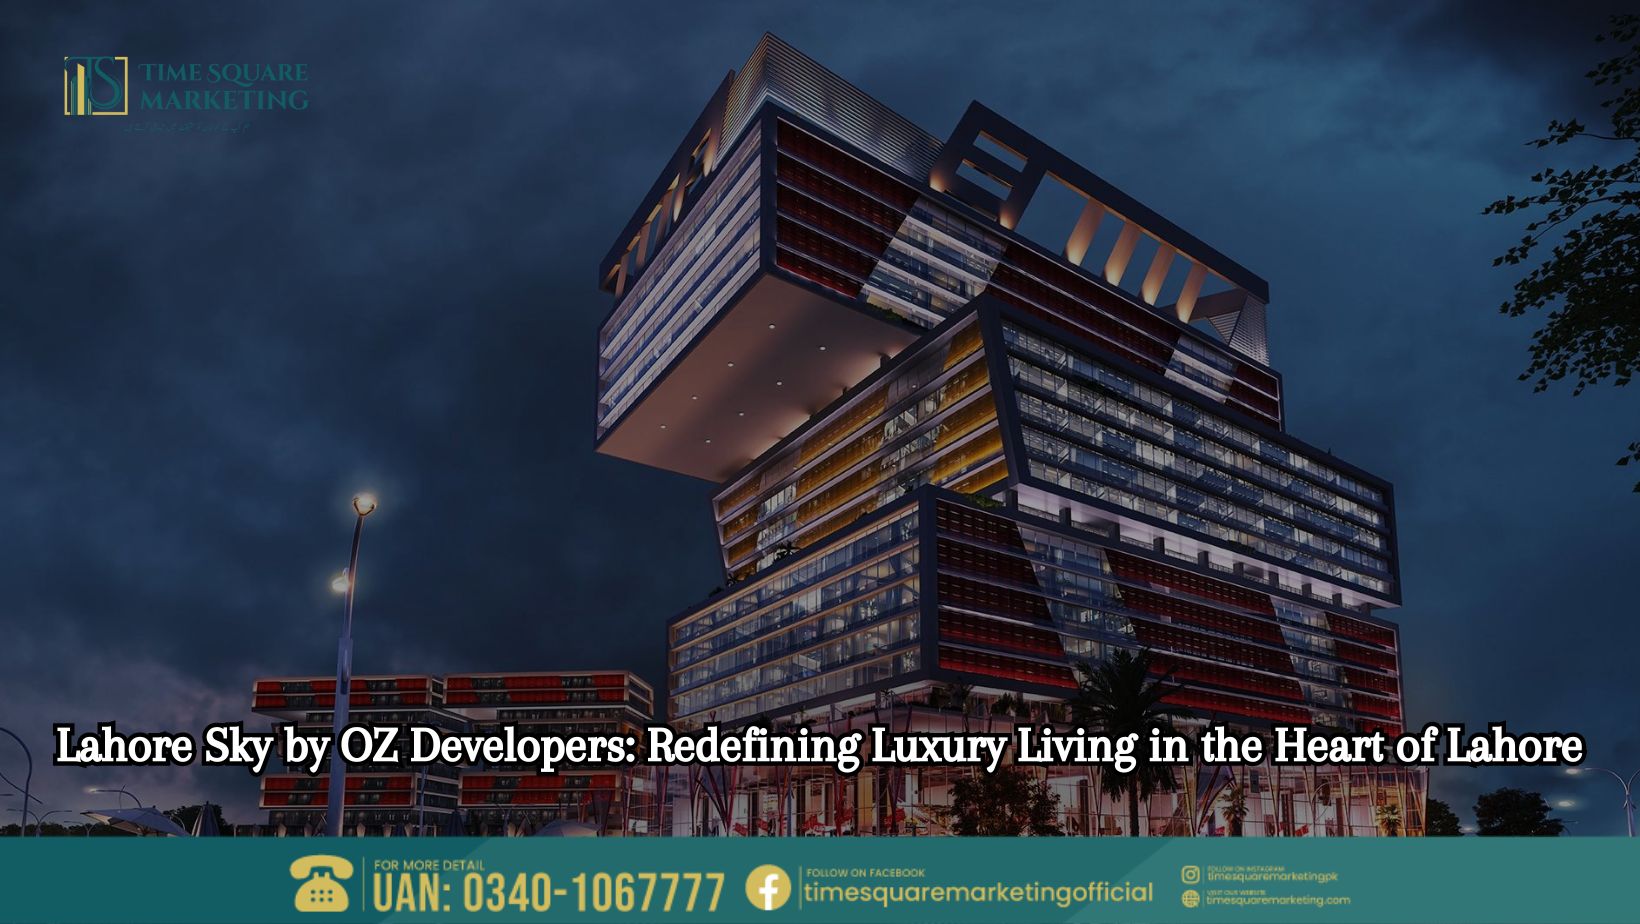 Lahore Sky by OZ Developers Redefining Luxury Living in the Heart of Lahore